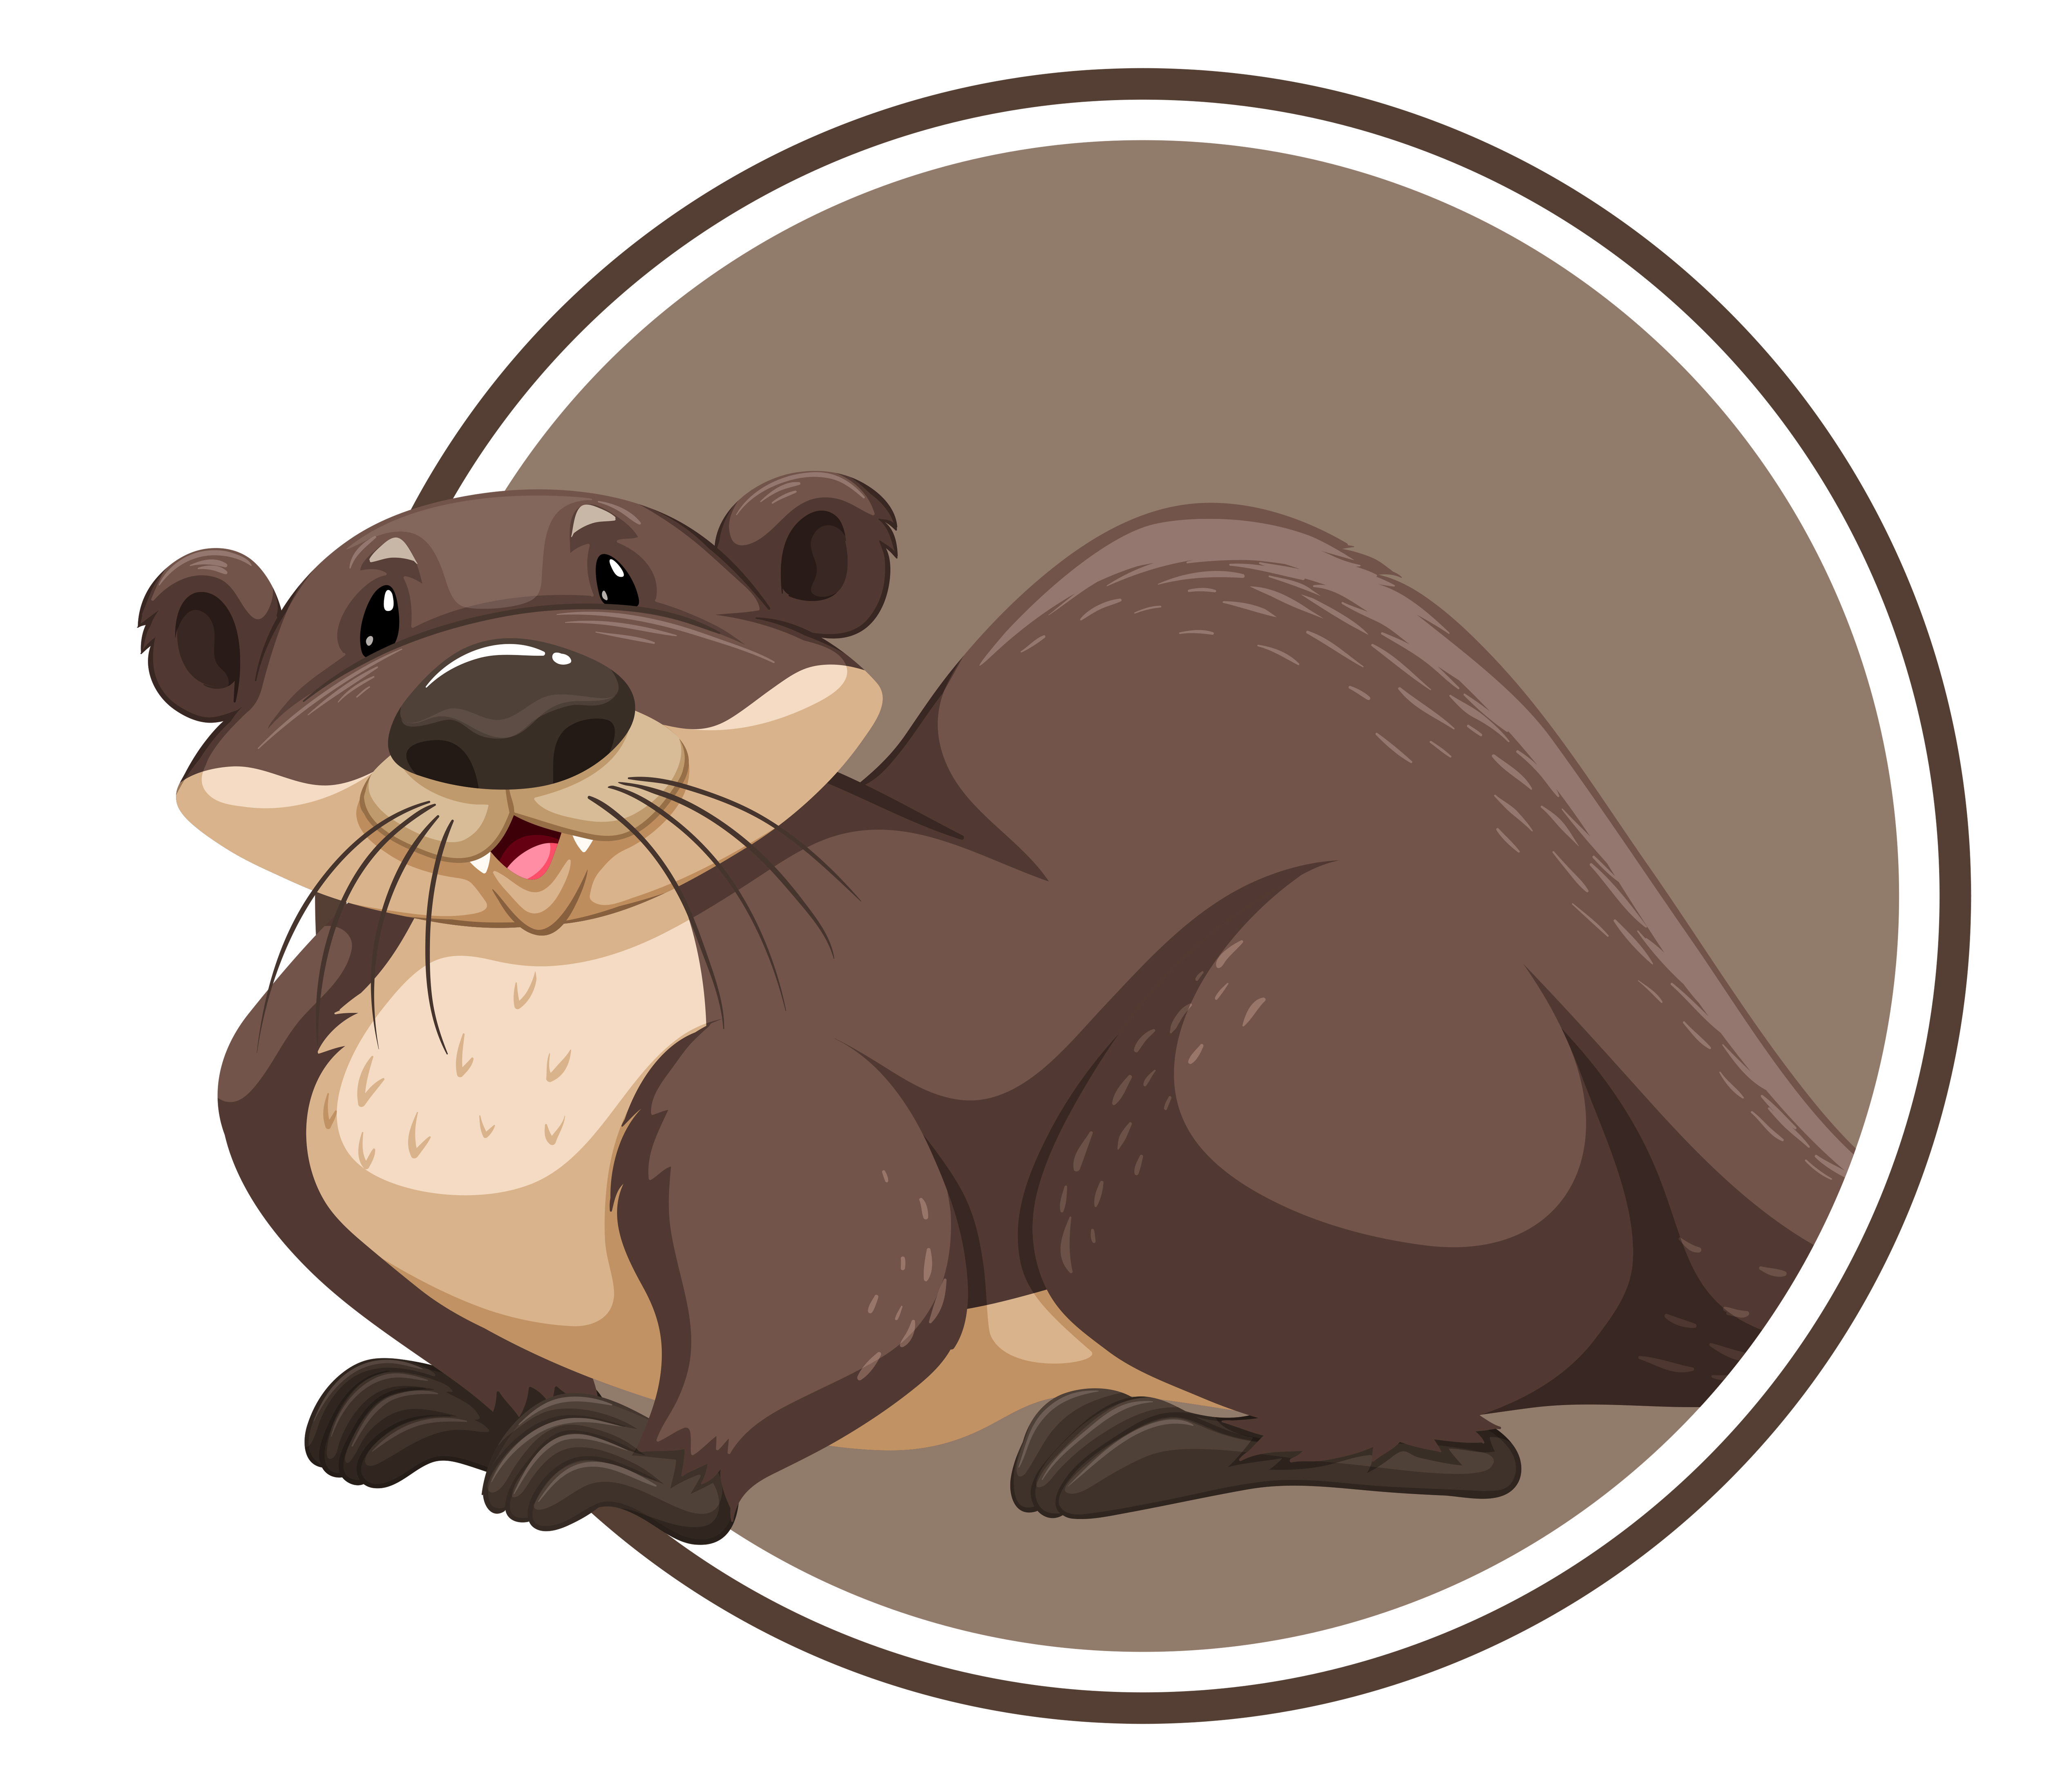 Download Otter in circle banner - Download Free Vectors, Clipart ...